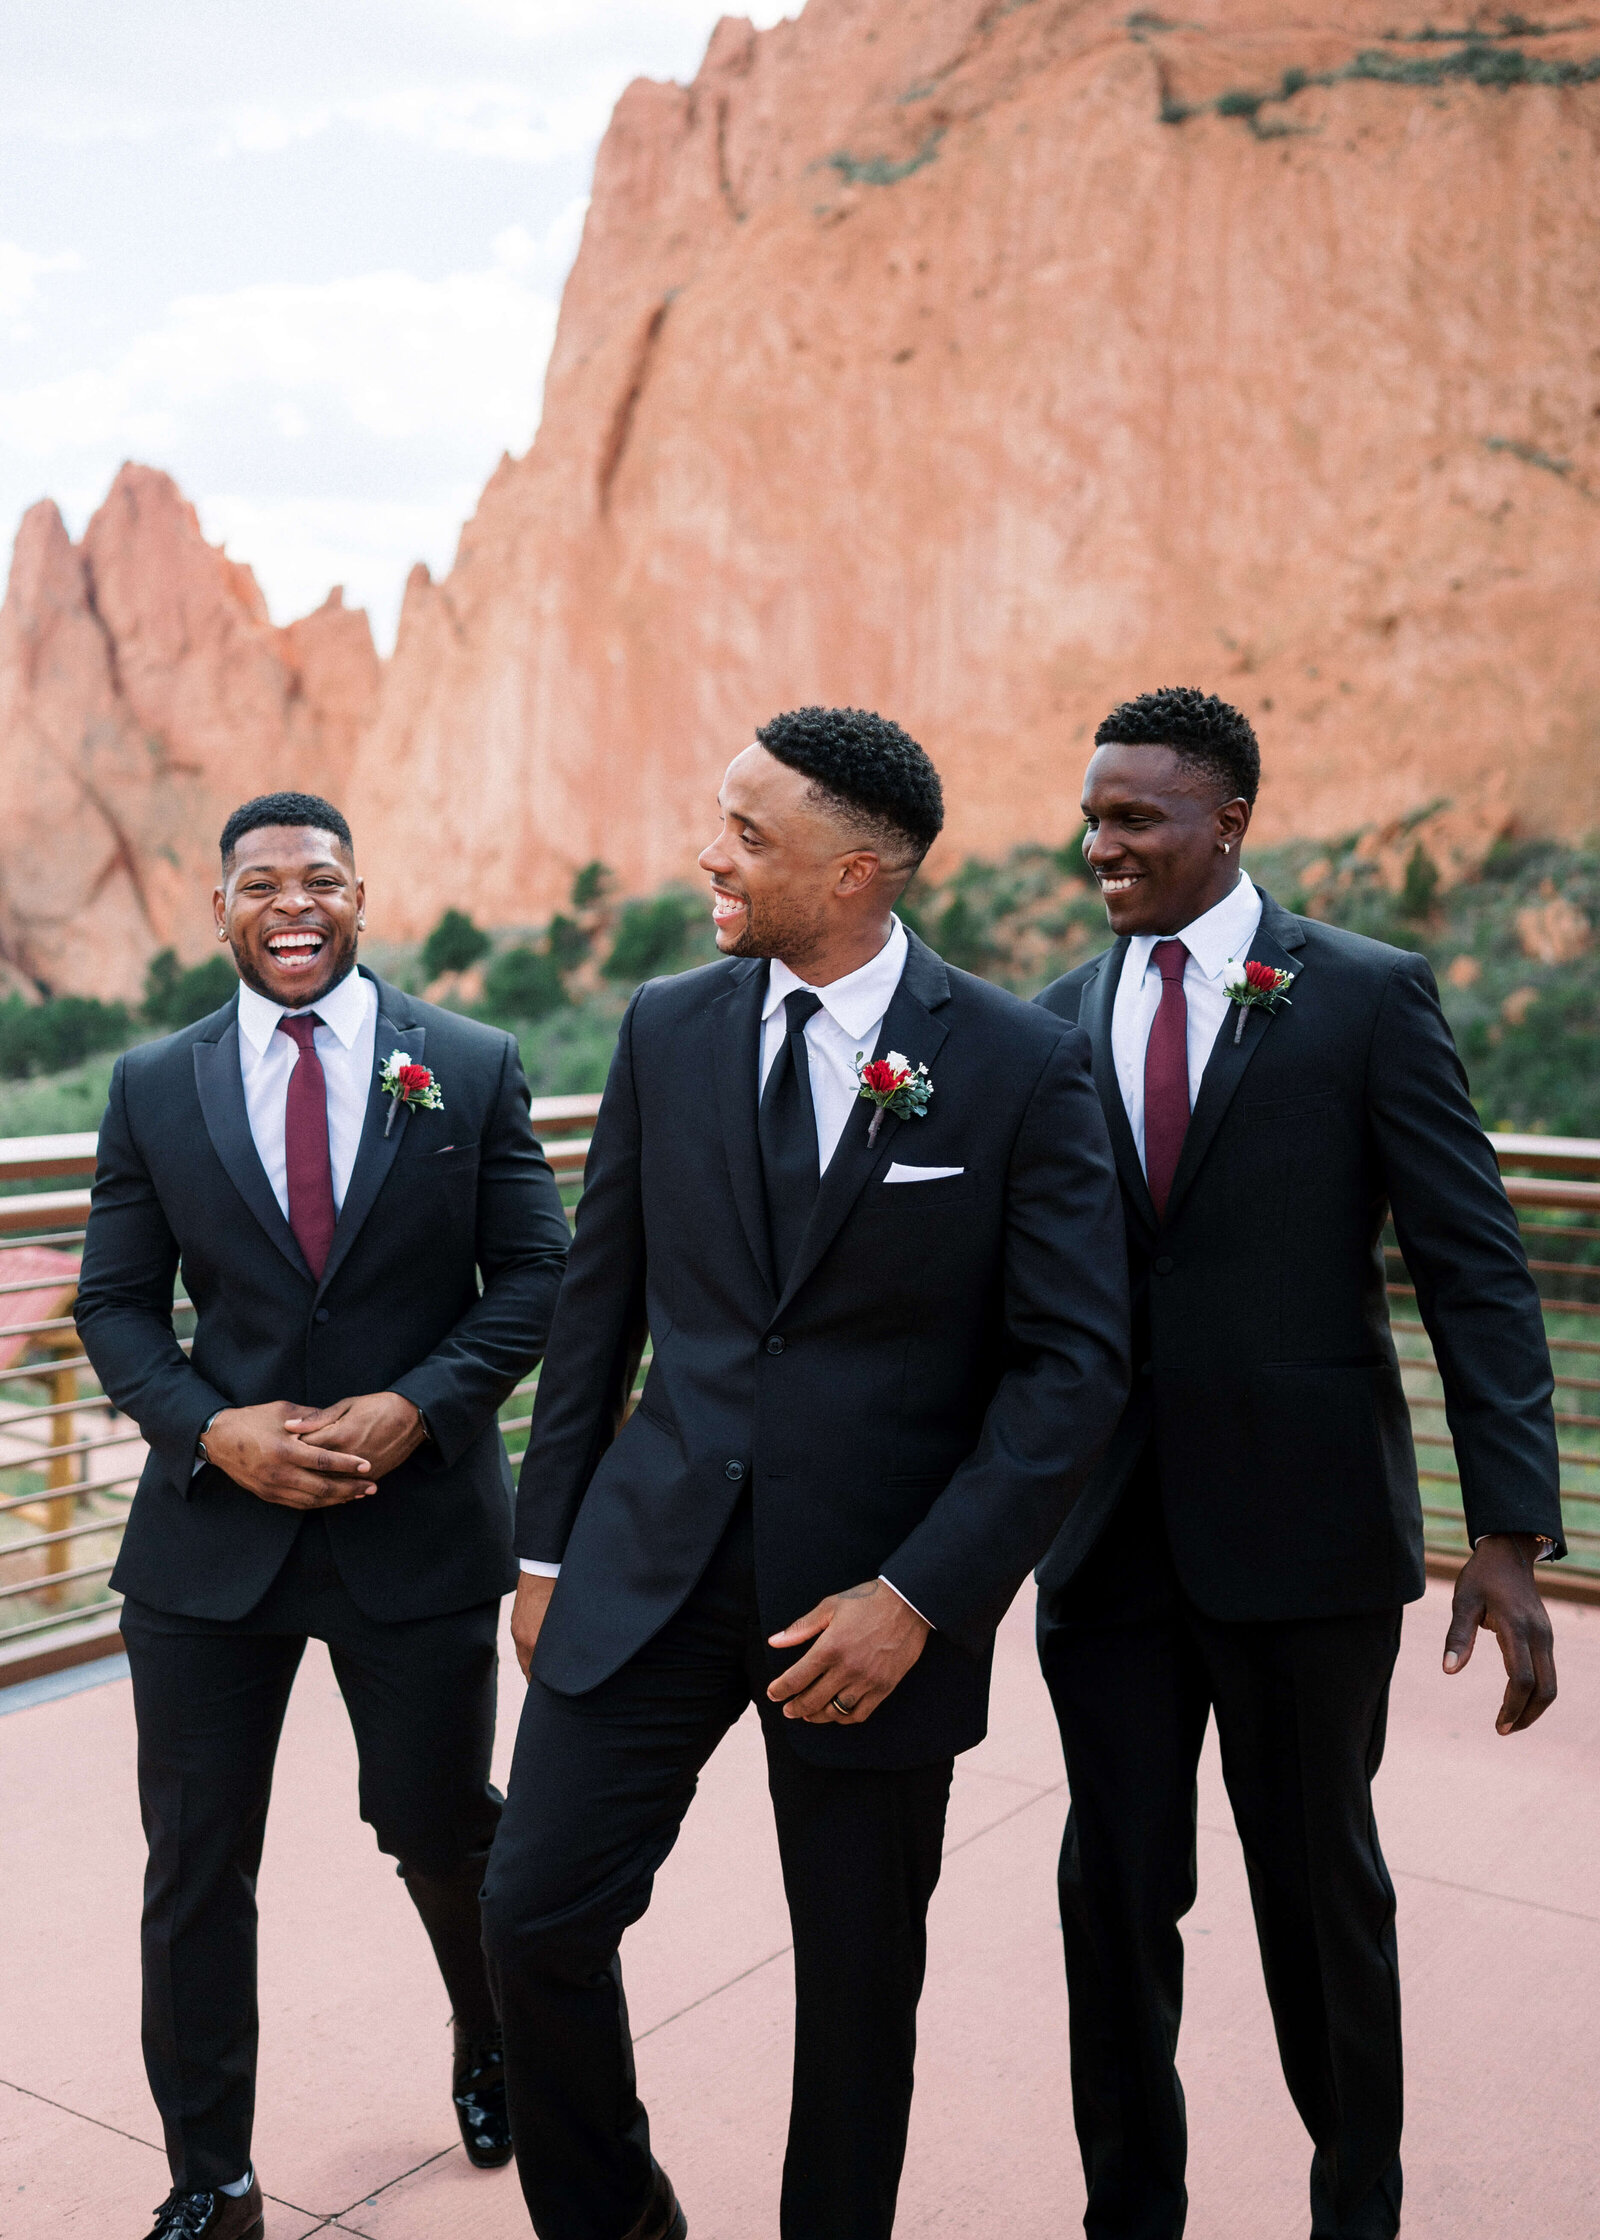 groom and his groomsmen laughing and walking together